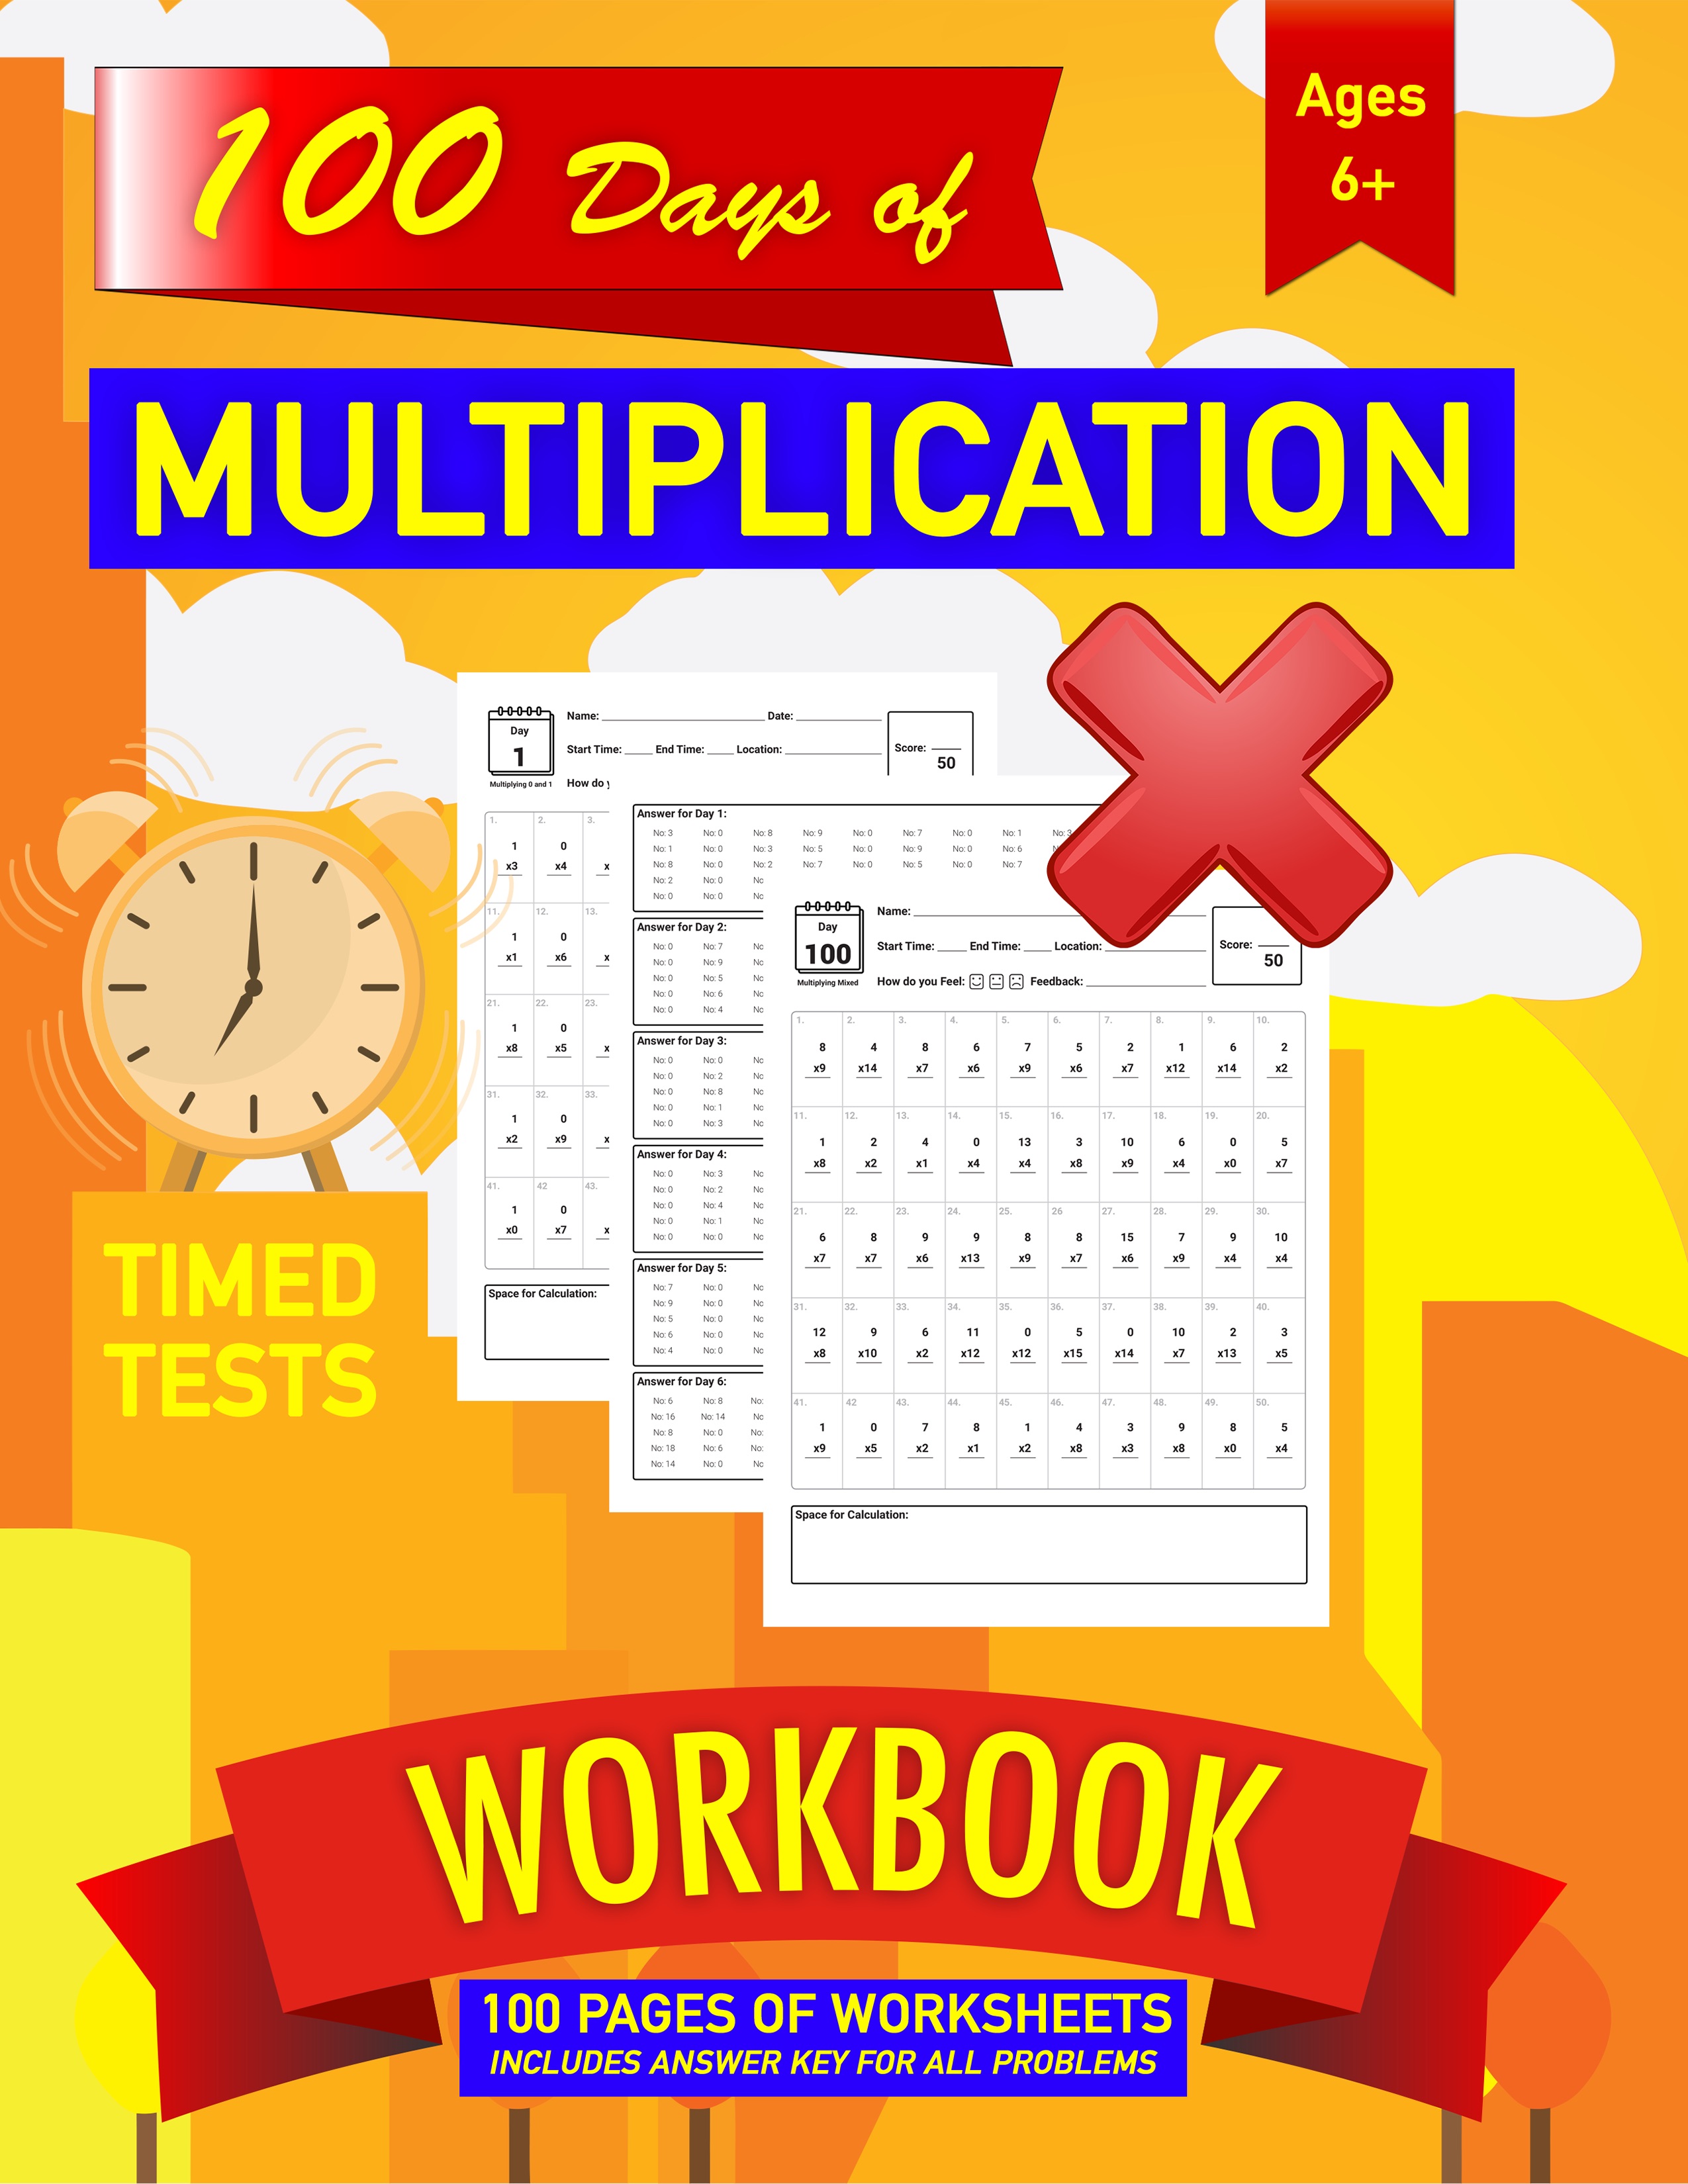 Multiplication Workbook - 100 Days of Timed Tests - Includes Answer Key For Problems - Ages 6+ Grades 1-5: 100 Pages of Practice Worksheets for Education Multiplication Workbooks